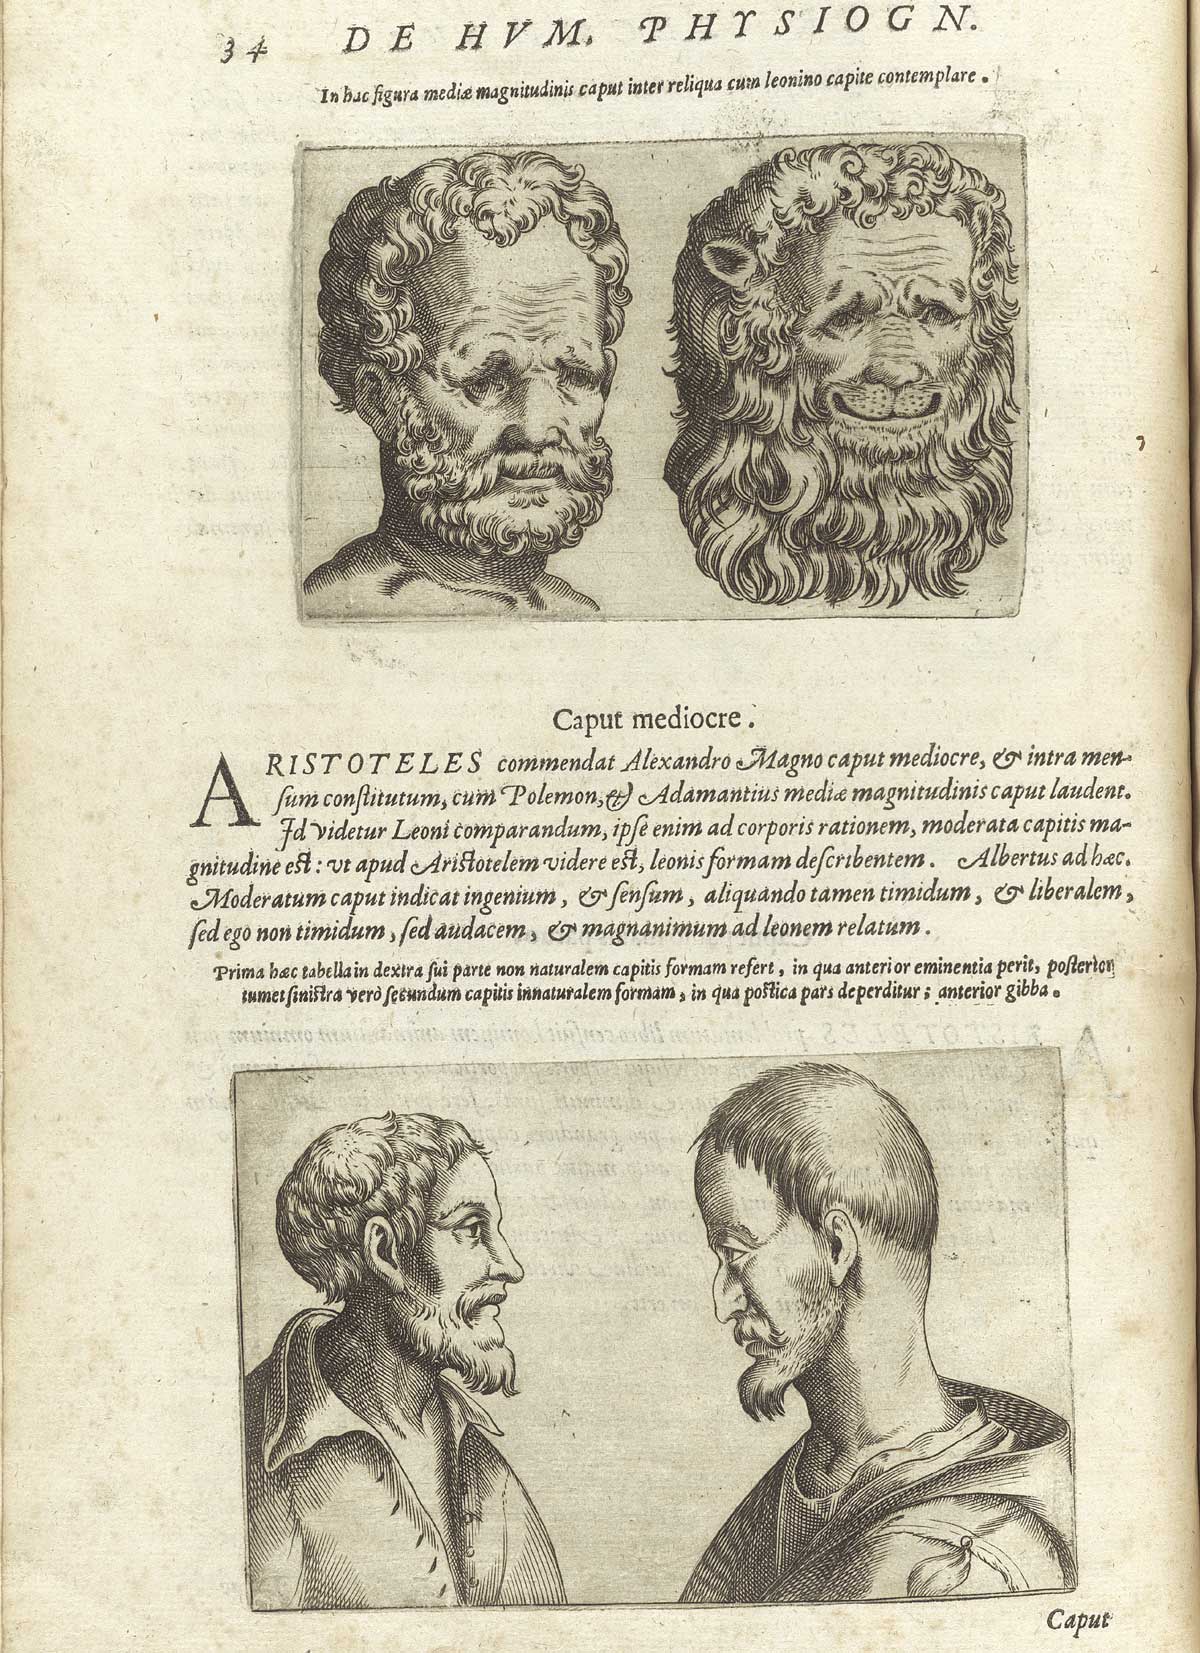 Page 34 of Giambattista della Porta's De humana physiognomonia libri IIII,  featuring an upper and lower image. In the top image has the front view of a man with a beard and the front view of a lion. The bottom image has the head and shoulders side view of two men in robes facing each other.